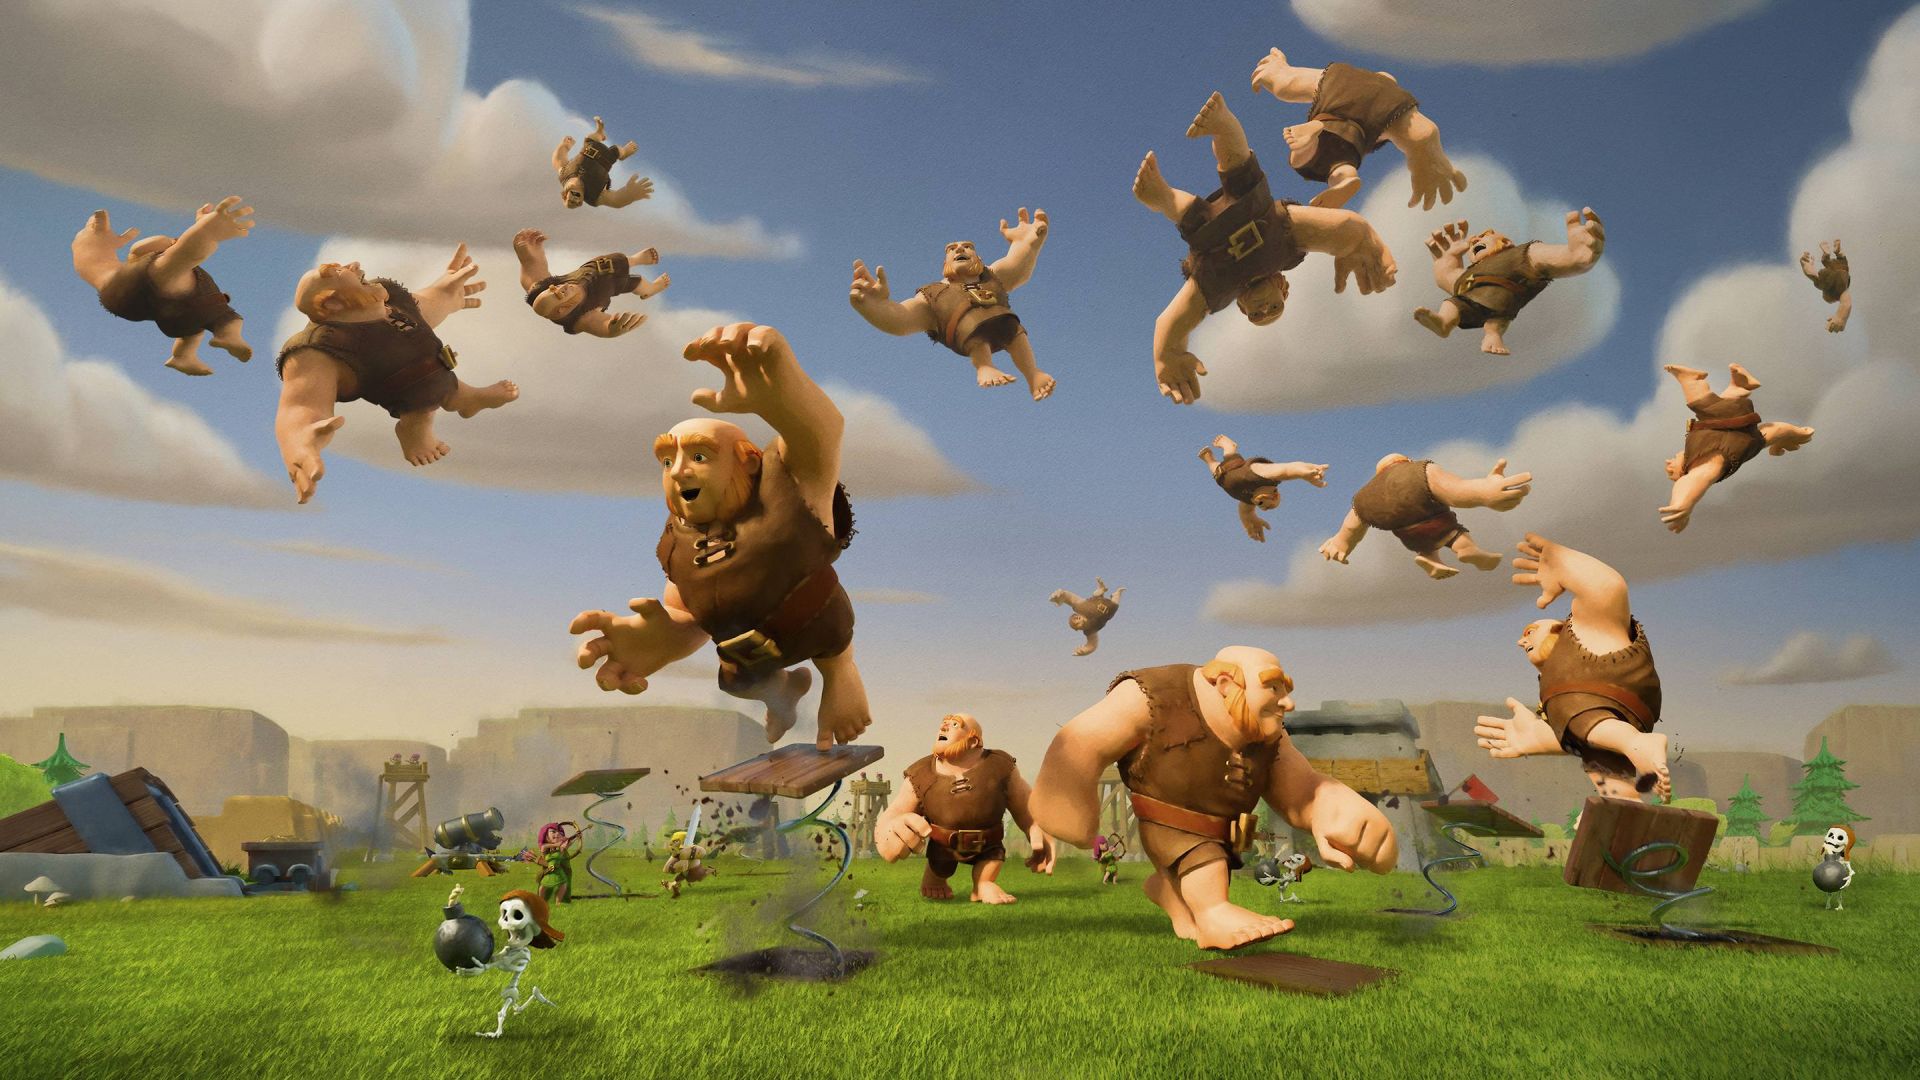 Wallpaper Clash of clans, giants, mobile game, fight